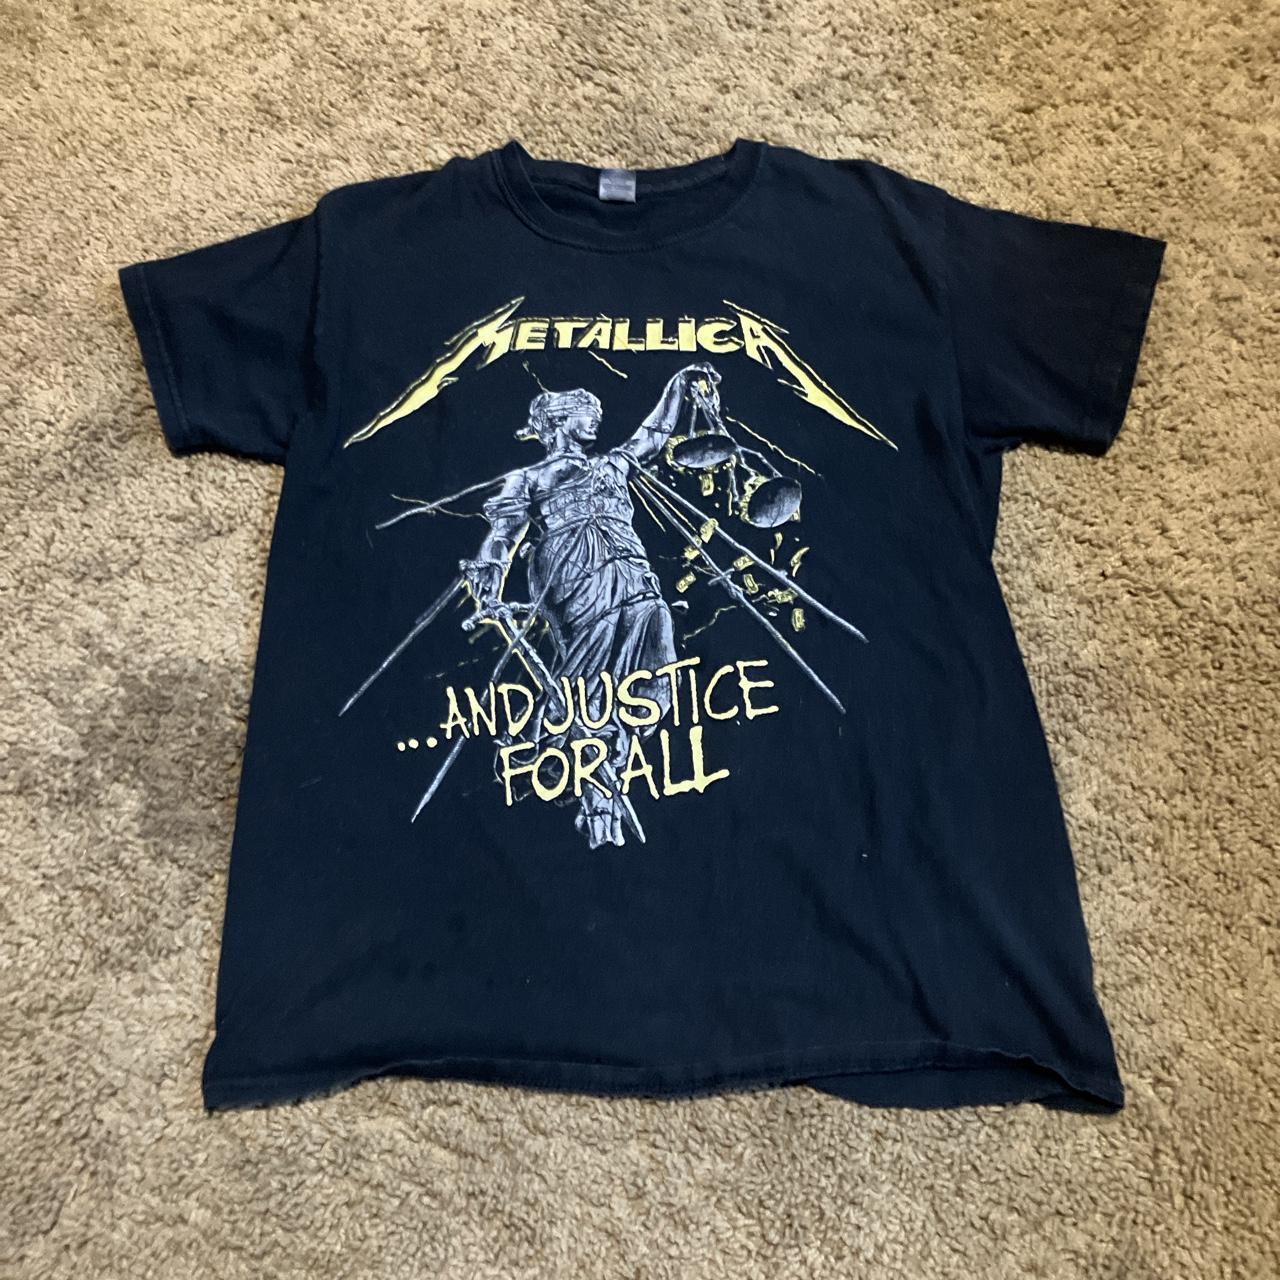 Metallica (And Justice for All) T shirt Men’s... - Depop